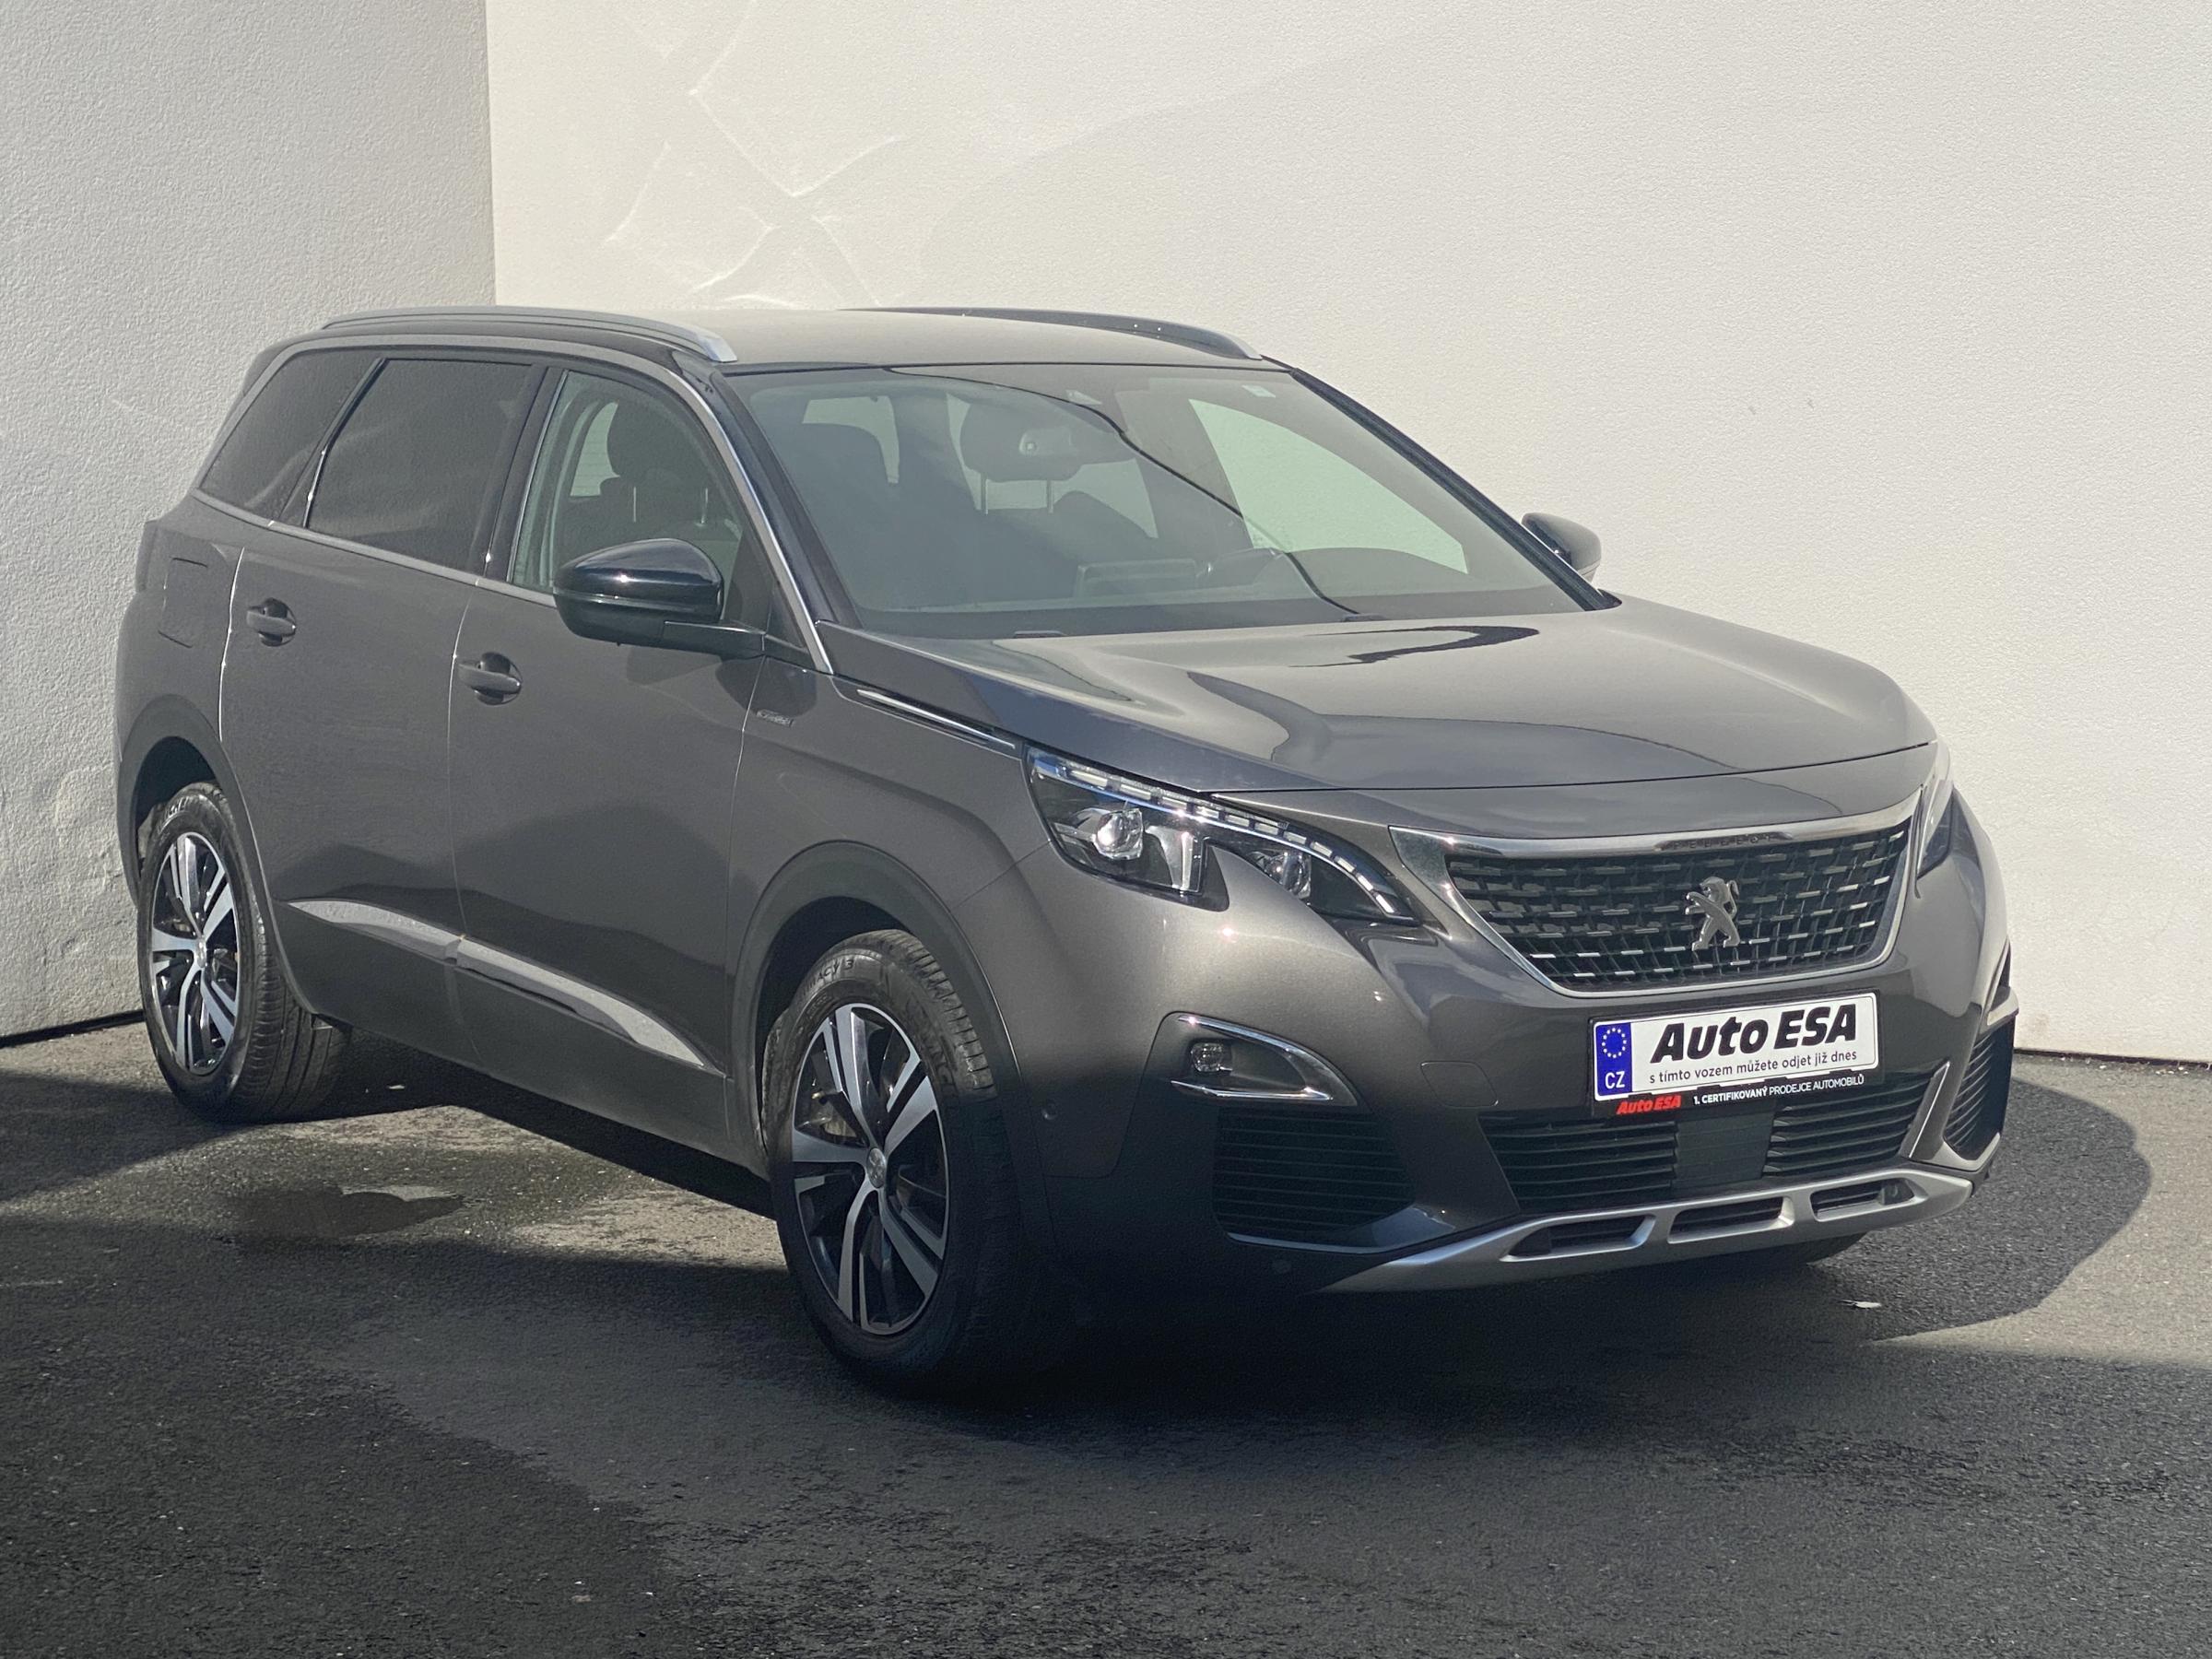 Peugeot 5008 gets a refresh for 2020